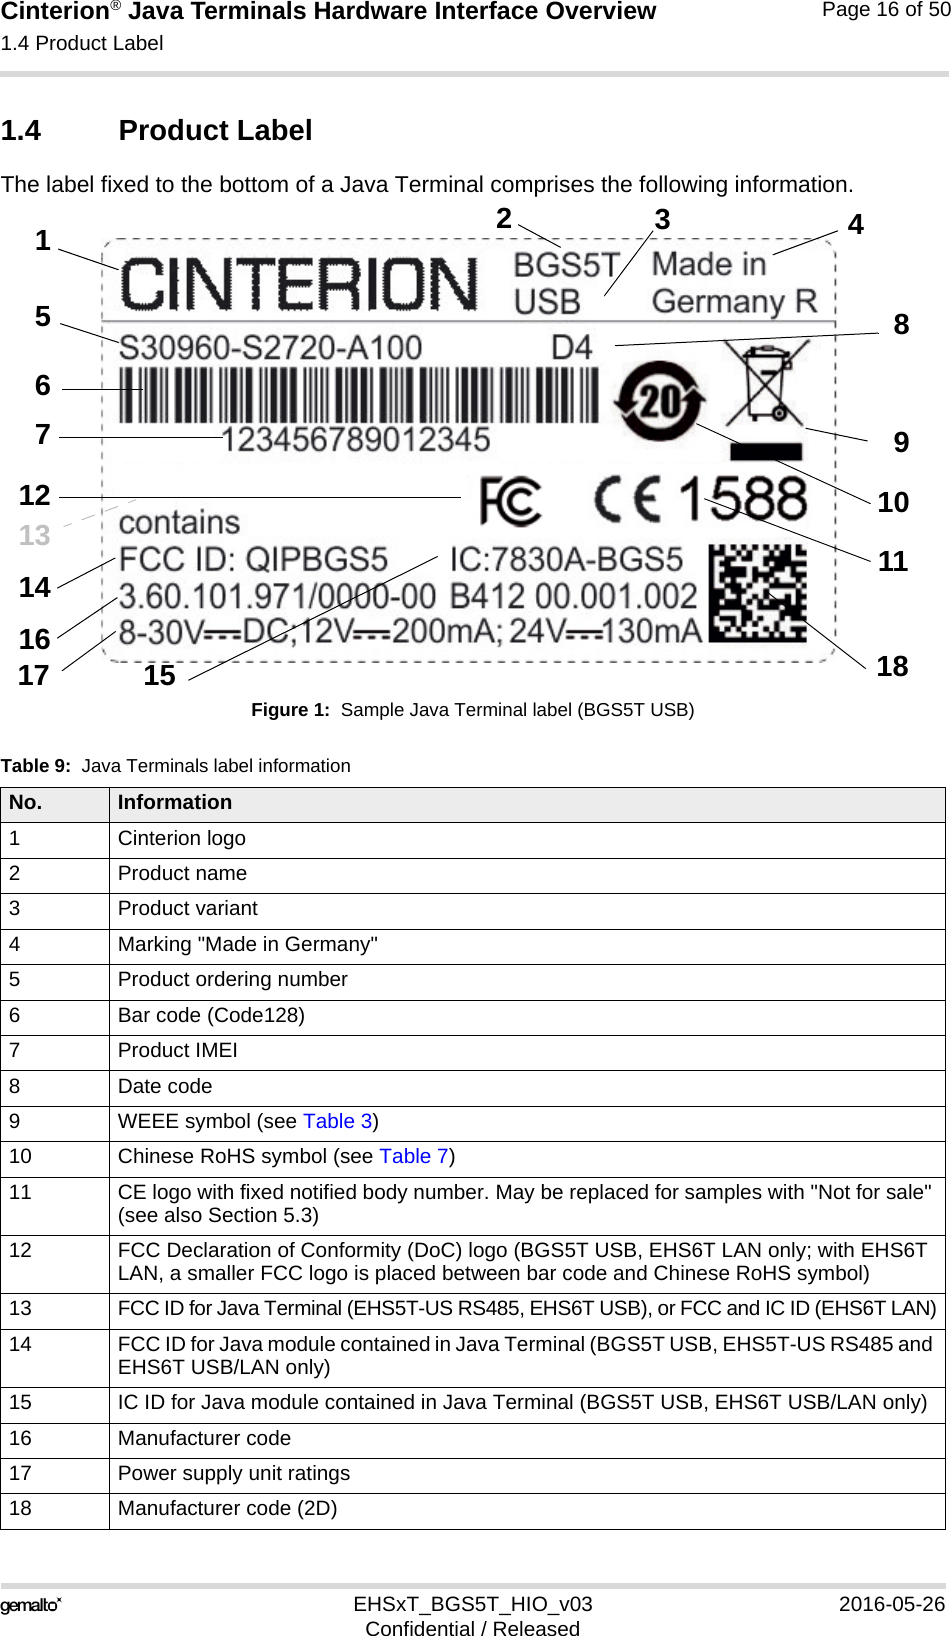 Cinterion® Java Terminals Hardware Interface Overview1.4 Product Label16EHSxT_BGS5T_HIO_v03 2016-05-26Confidential / ReleasedPage 16 of 501.4 Product LabelThe label fixed to the bottom of a Java Terminal comprises the following information.Figure 1:  Sample Java Terminal label (BGS5T USB)Table 9:  Java Terminals label informationNo. Information1 Cinterion logo2 Product name3 Product variant4 Marking &quot;Made in Germany&quot;5 Product ordering number6 Bar code (Code128)7 Product IMEI8 Date code9 WEEE symbol (see Table 3)10 Chinese RoHS symbol (see Table 7)11 CE logo with fixed notified body number. May be replaced for samples with &quot;Not for sale&quot; (see also Section 5.3)12 FCC Declaration of Conformity (DoC) logo (BGS5T USB, EHS6T LAN only; with EHS6T LAN, a smaller FCC logo is placed between bar code and Chinese RoHS symbol)13 FCC ID for Java Terminal (EHS5T-US RS485, EHS6T USB), or FCC and IC ID (EHS6T LAN)14 FCC ID for Java module contained in Java Terminal (BGS5T USB, EHS5T-US RS485 and EHS6T USB/LAN only)15 IC ID for Java module contained in Java Terminal (BGS5T USB, EHS6T USB/LAN only)16 Manufacturer code17 Power supply unit ratings18 Manufacturer code (2D)1234567891012151617 18111314